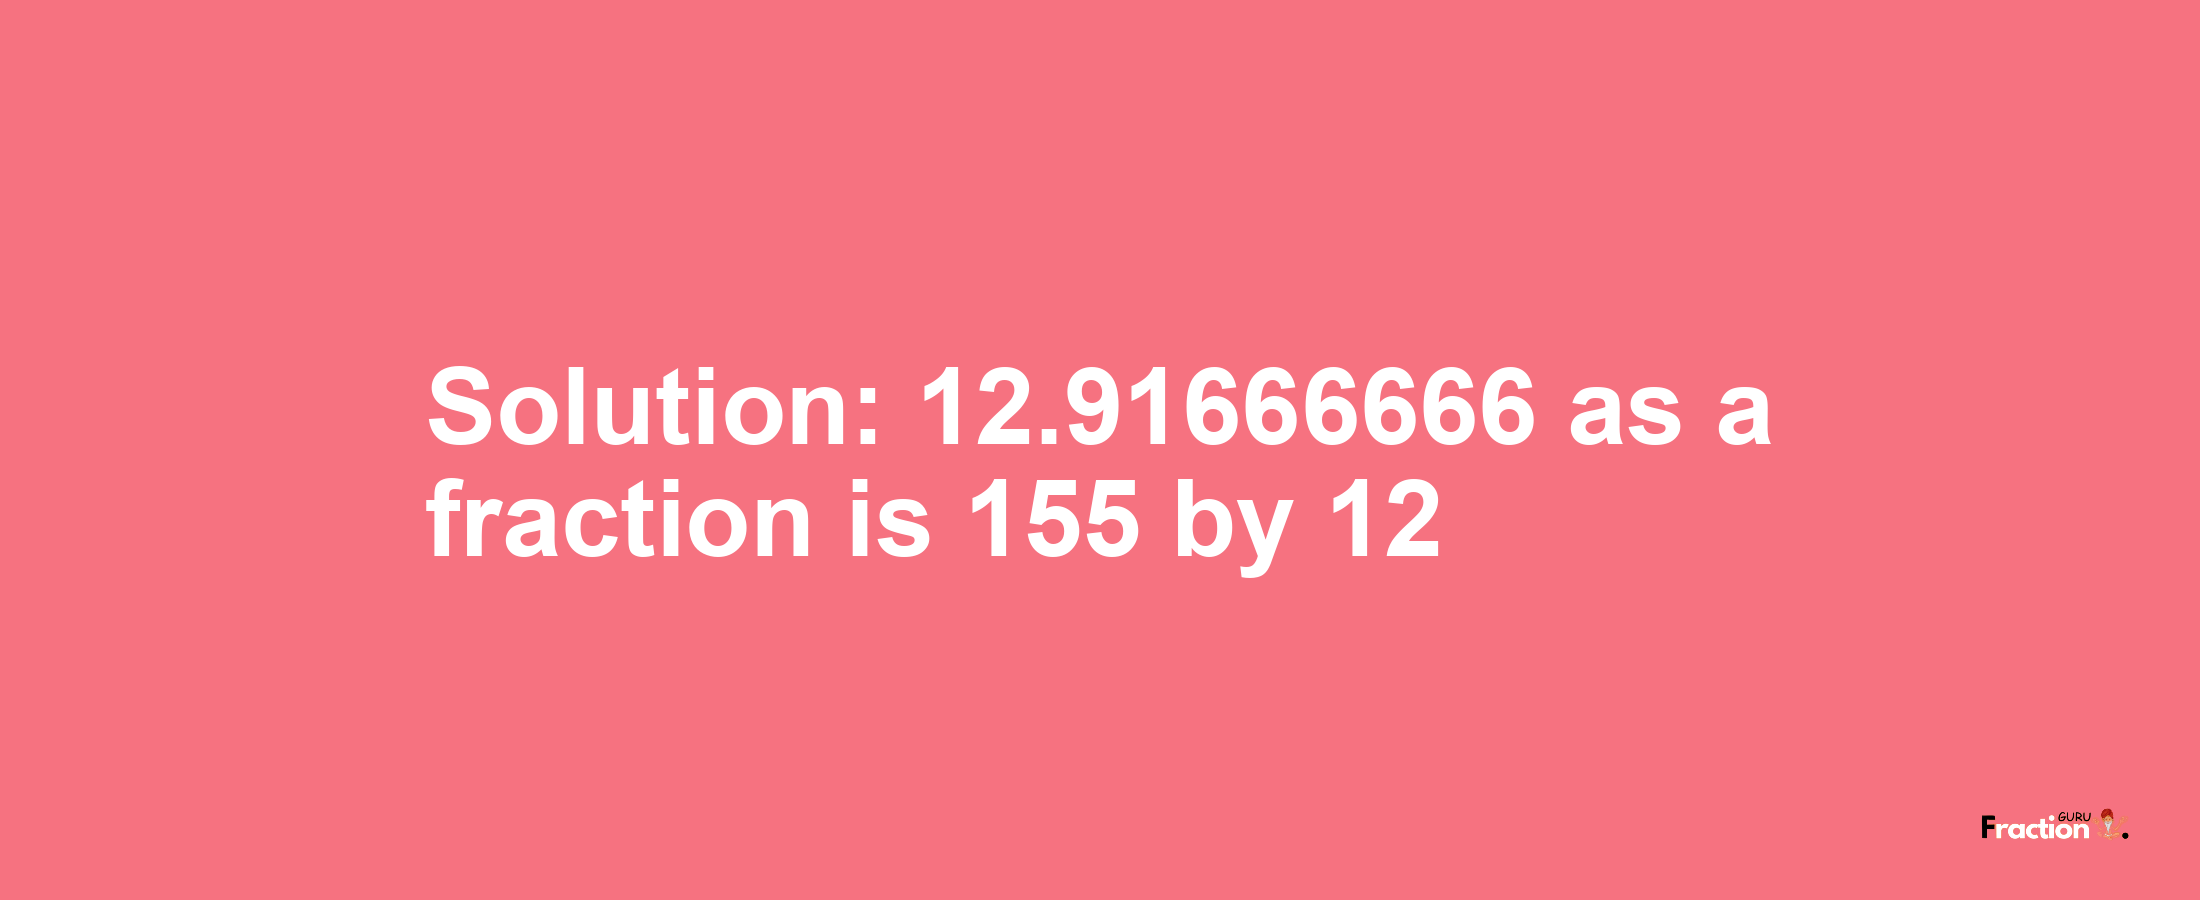 Solution:12.91666666 as a fraction is 155/12